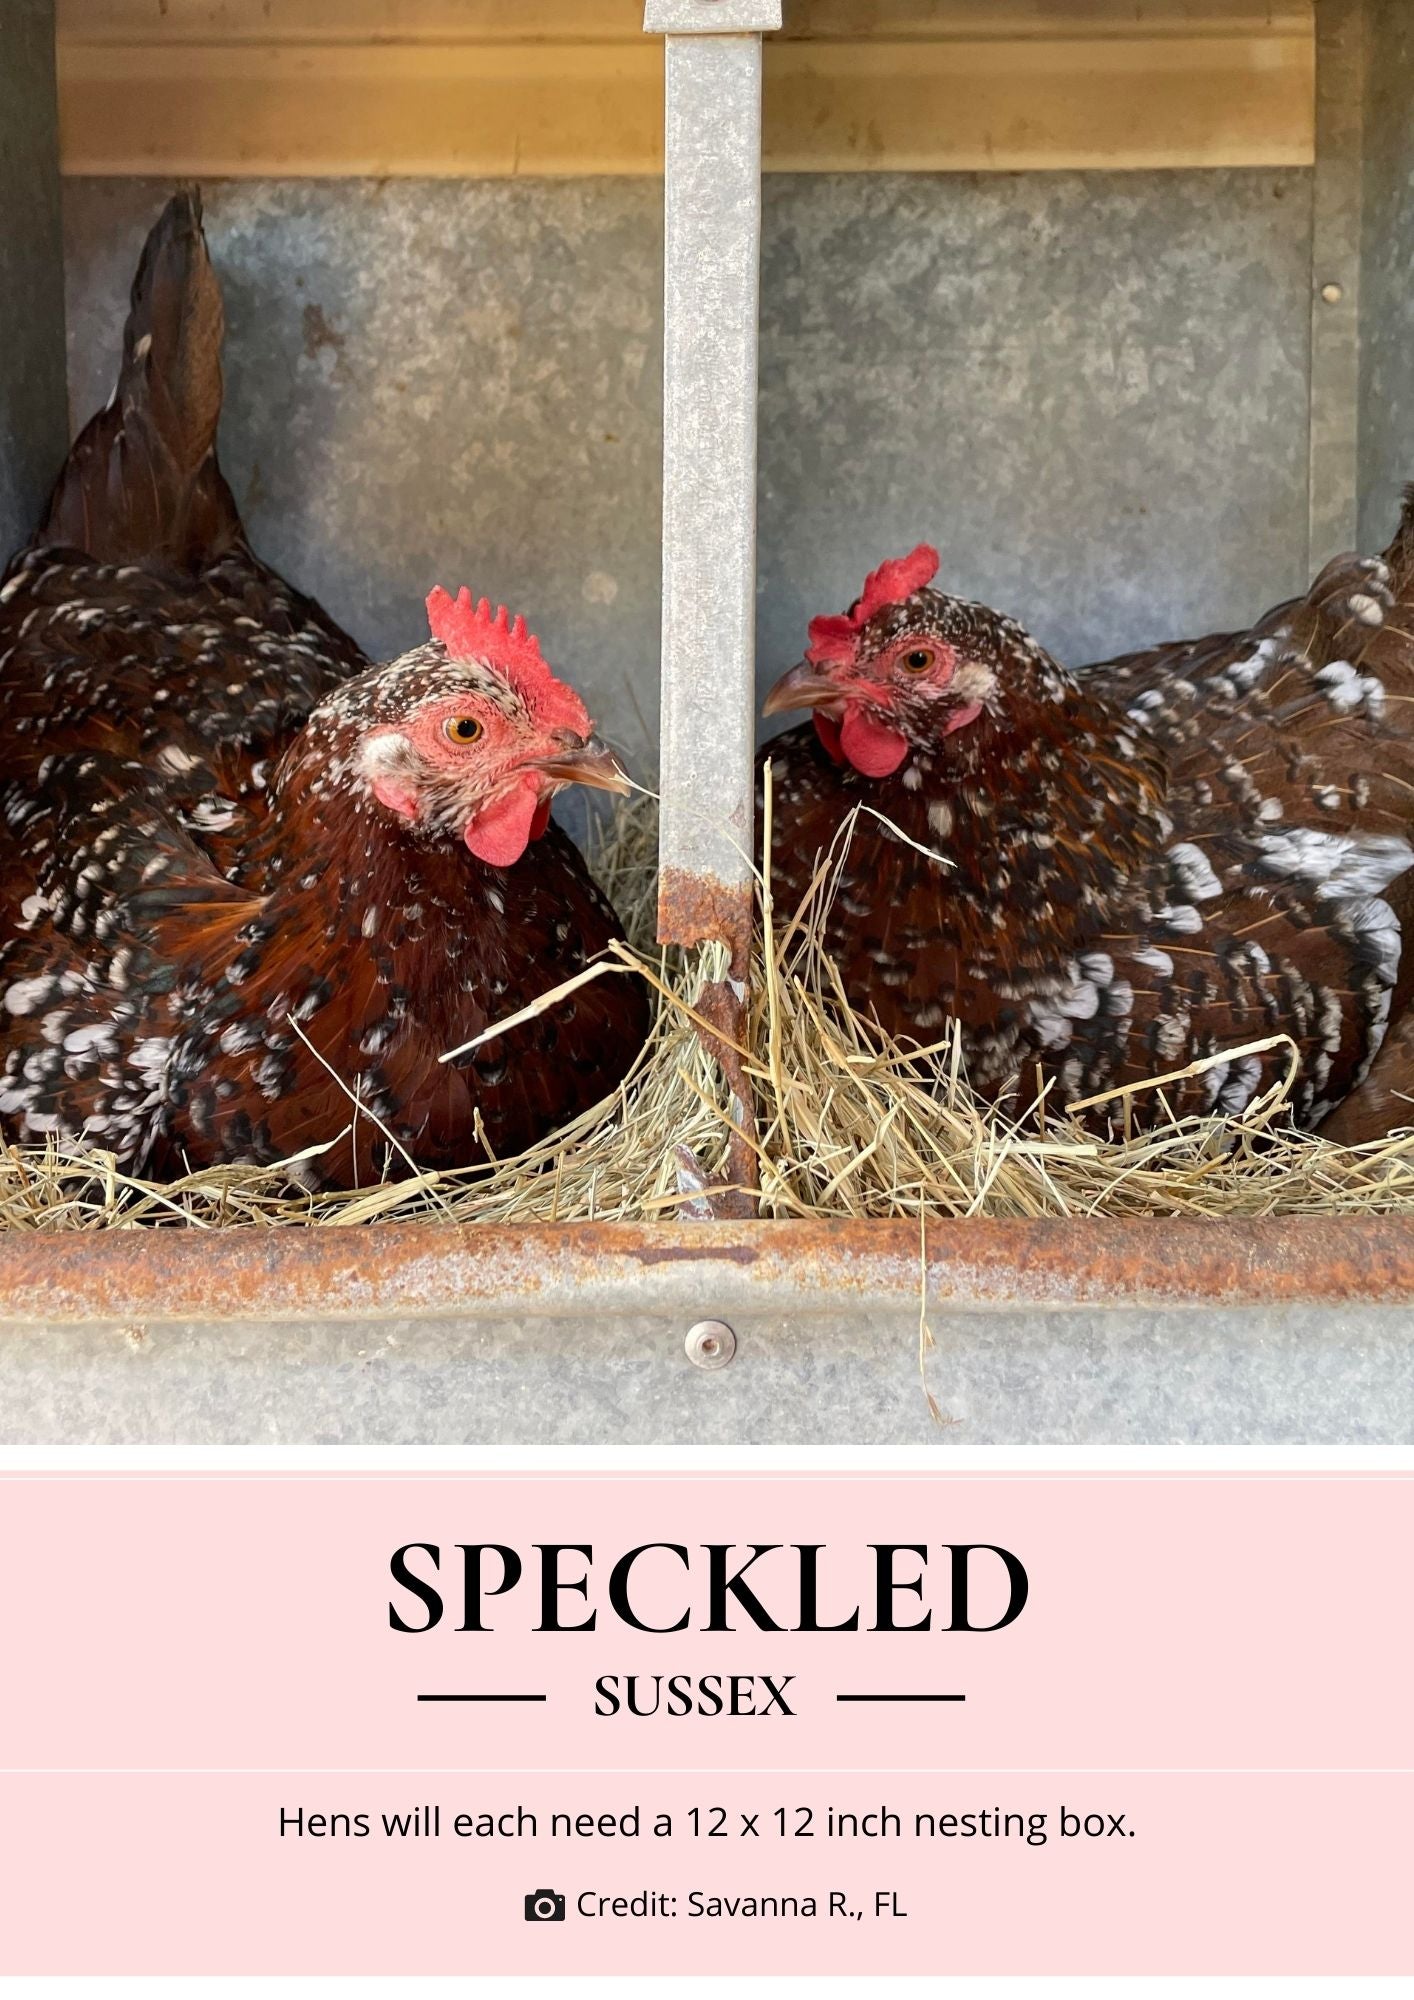 nesting box size for speckled sussex chickens